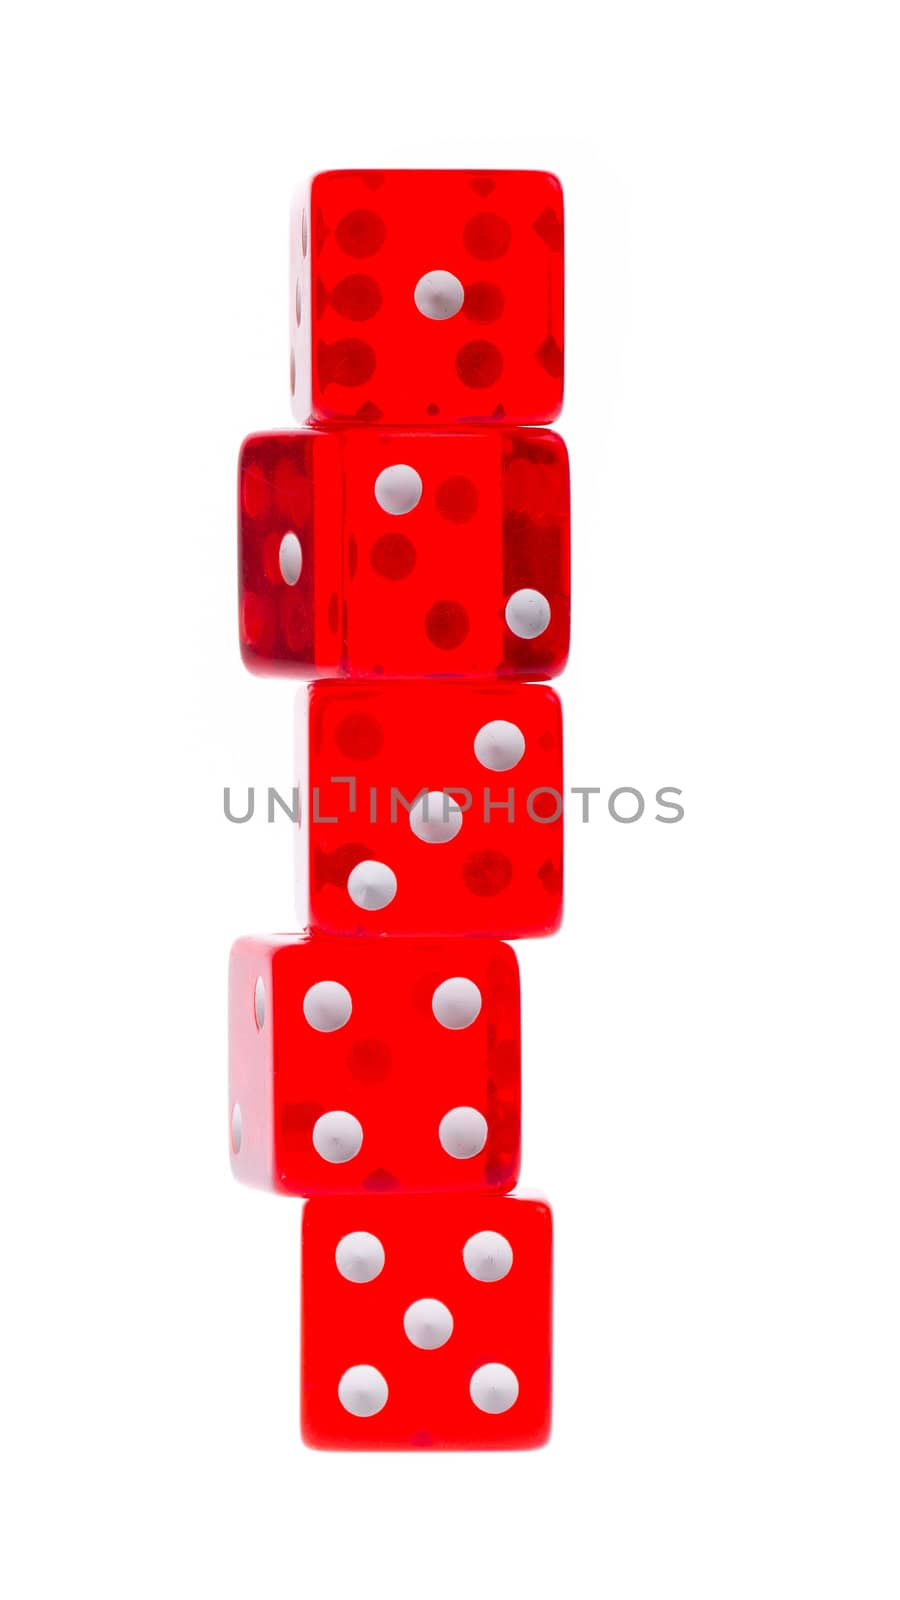 Five transparent  red dice on a white background